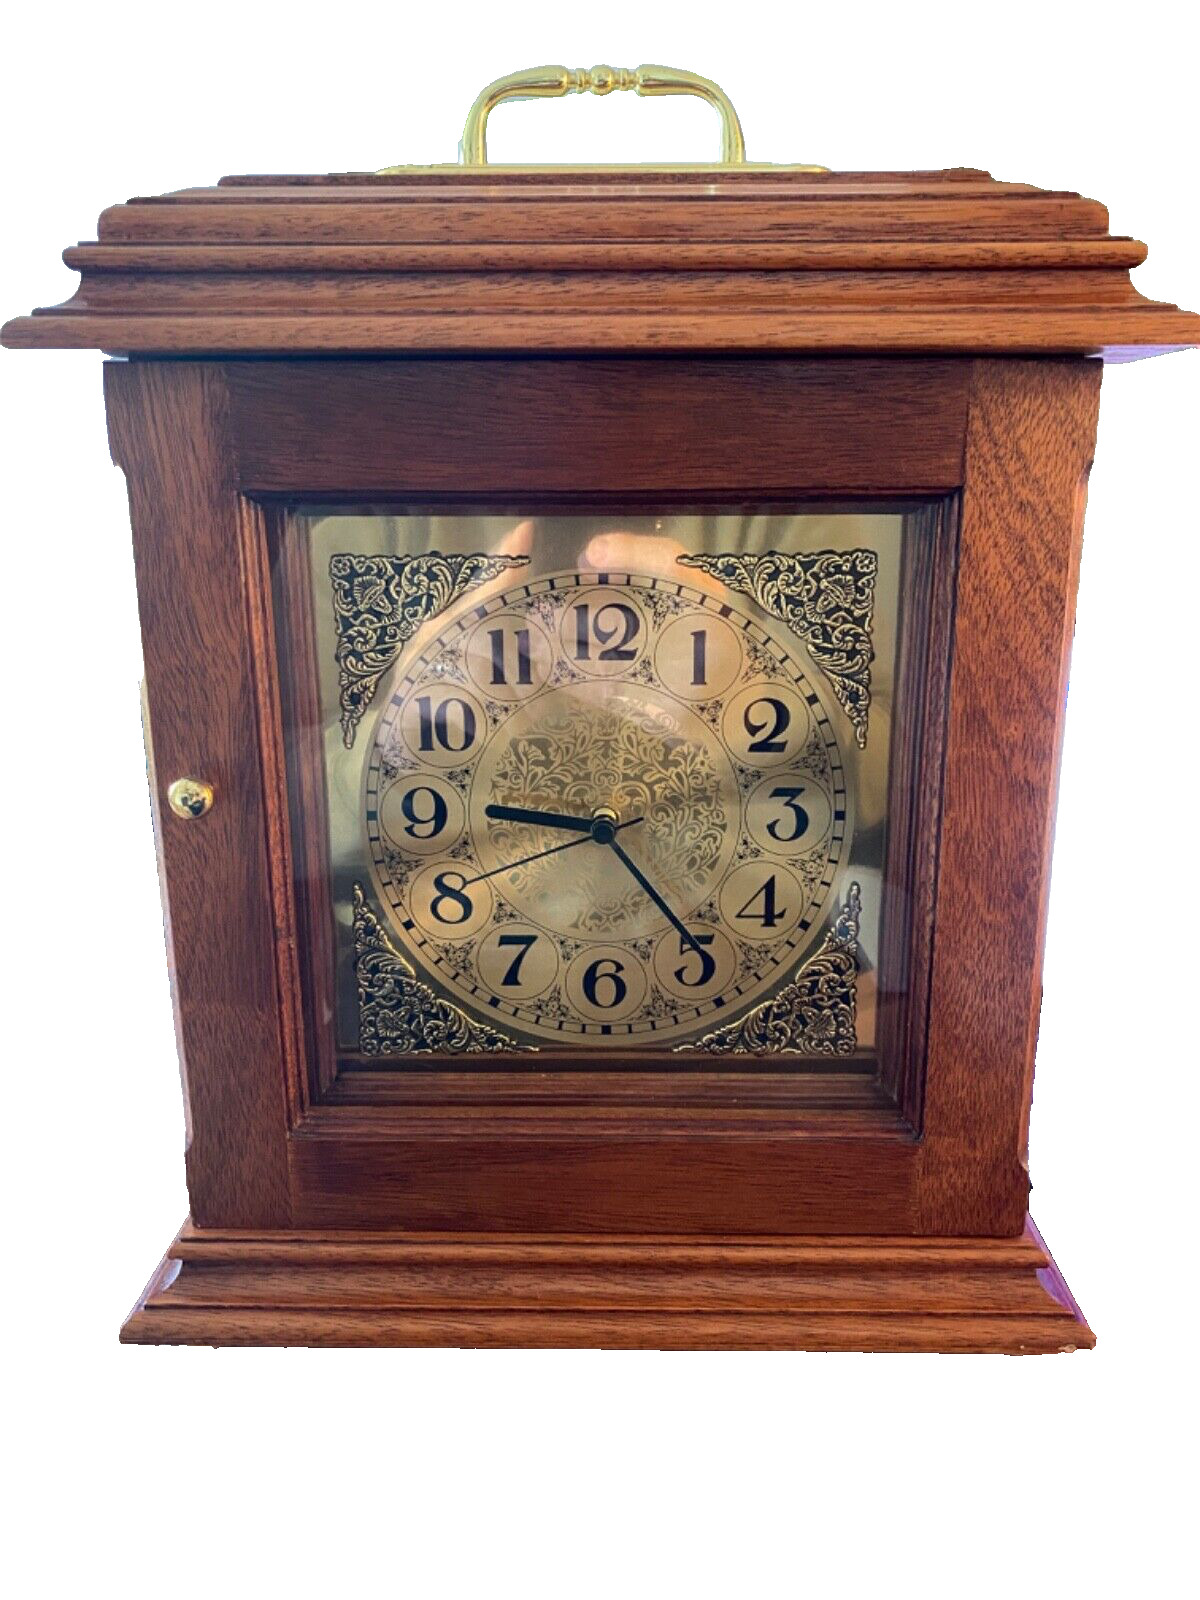 HOWARD MILLER \'STYLE\' Oak Mantle Clock Made in USA Exquisite Craftmanship Tested